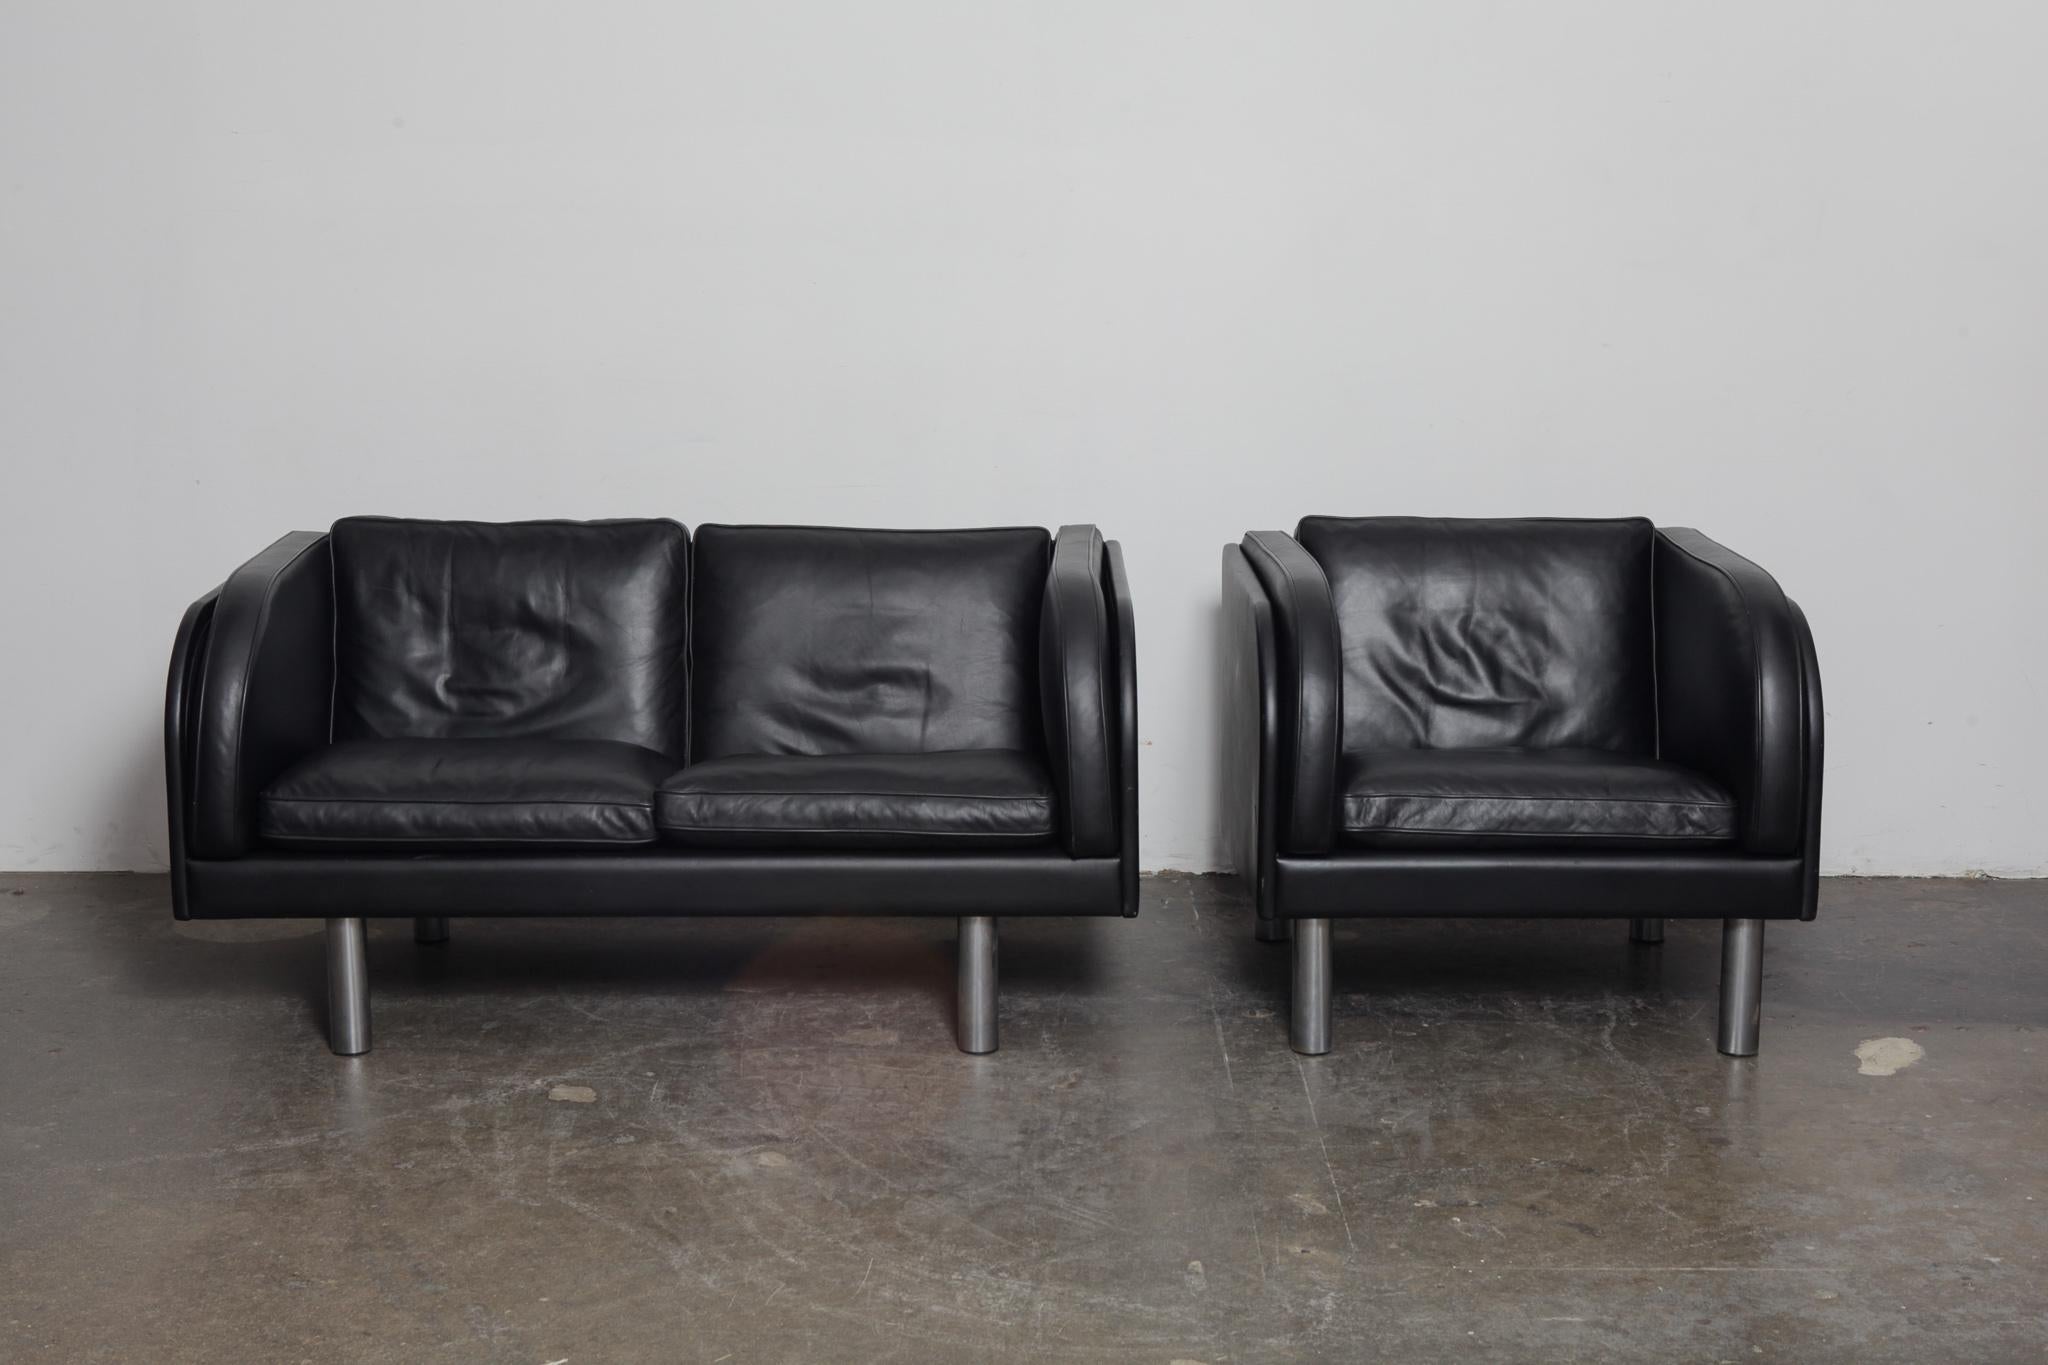 Danish black leather 2-seat sofa and lounge chair set with metal legs, designed by Jørgen Gammelgaard and produced by Erik Jørgensen. Model EJ-20-2. Both are in very good original condition with no leather damage. Rare to get a matching sofa and